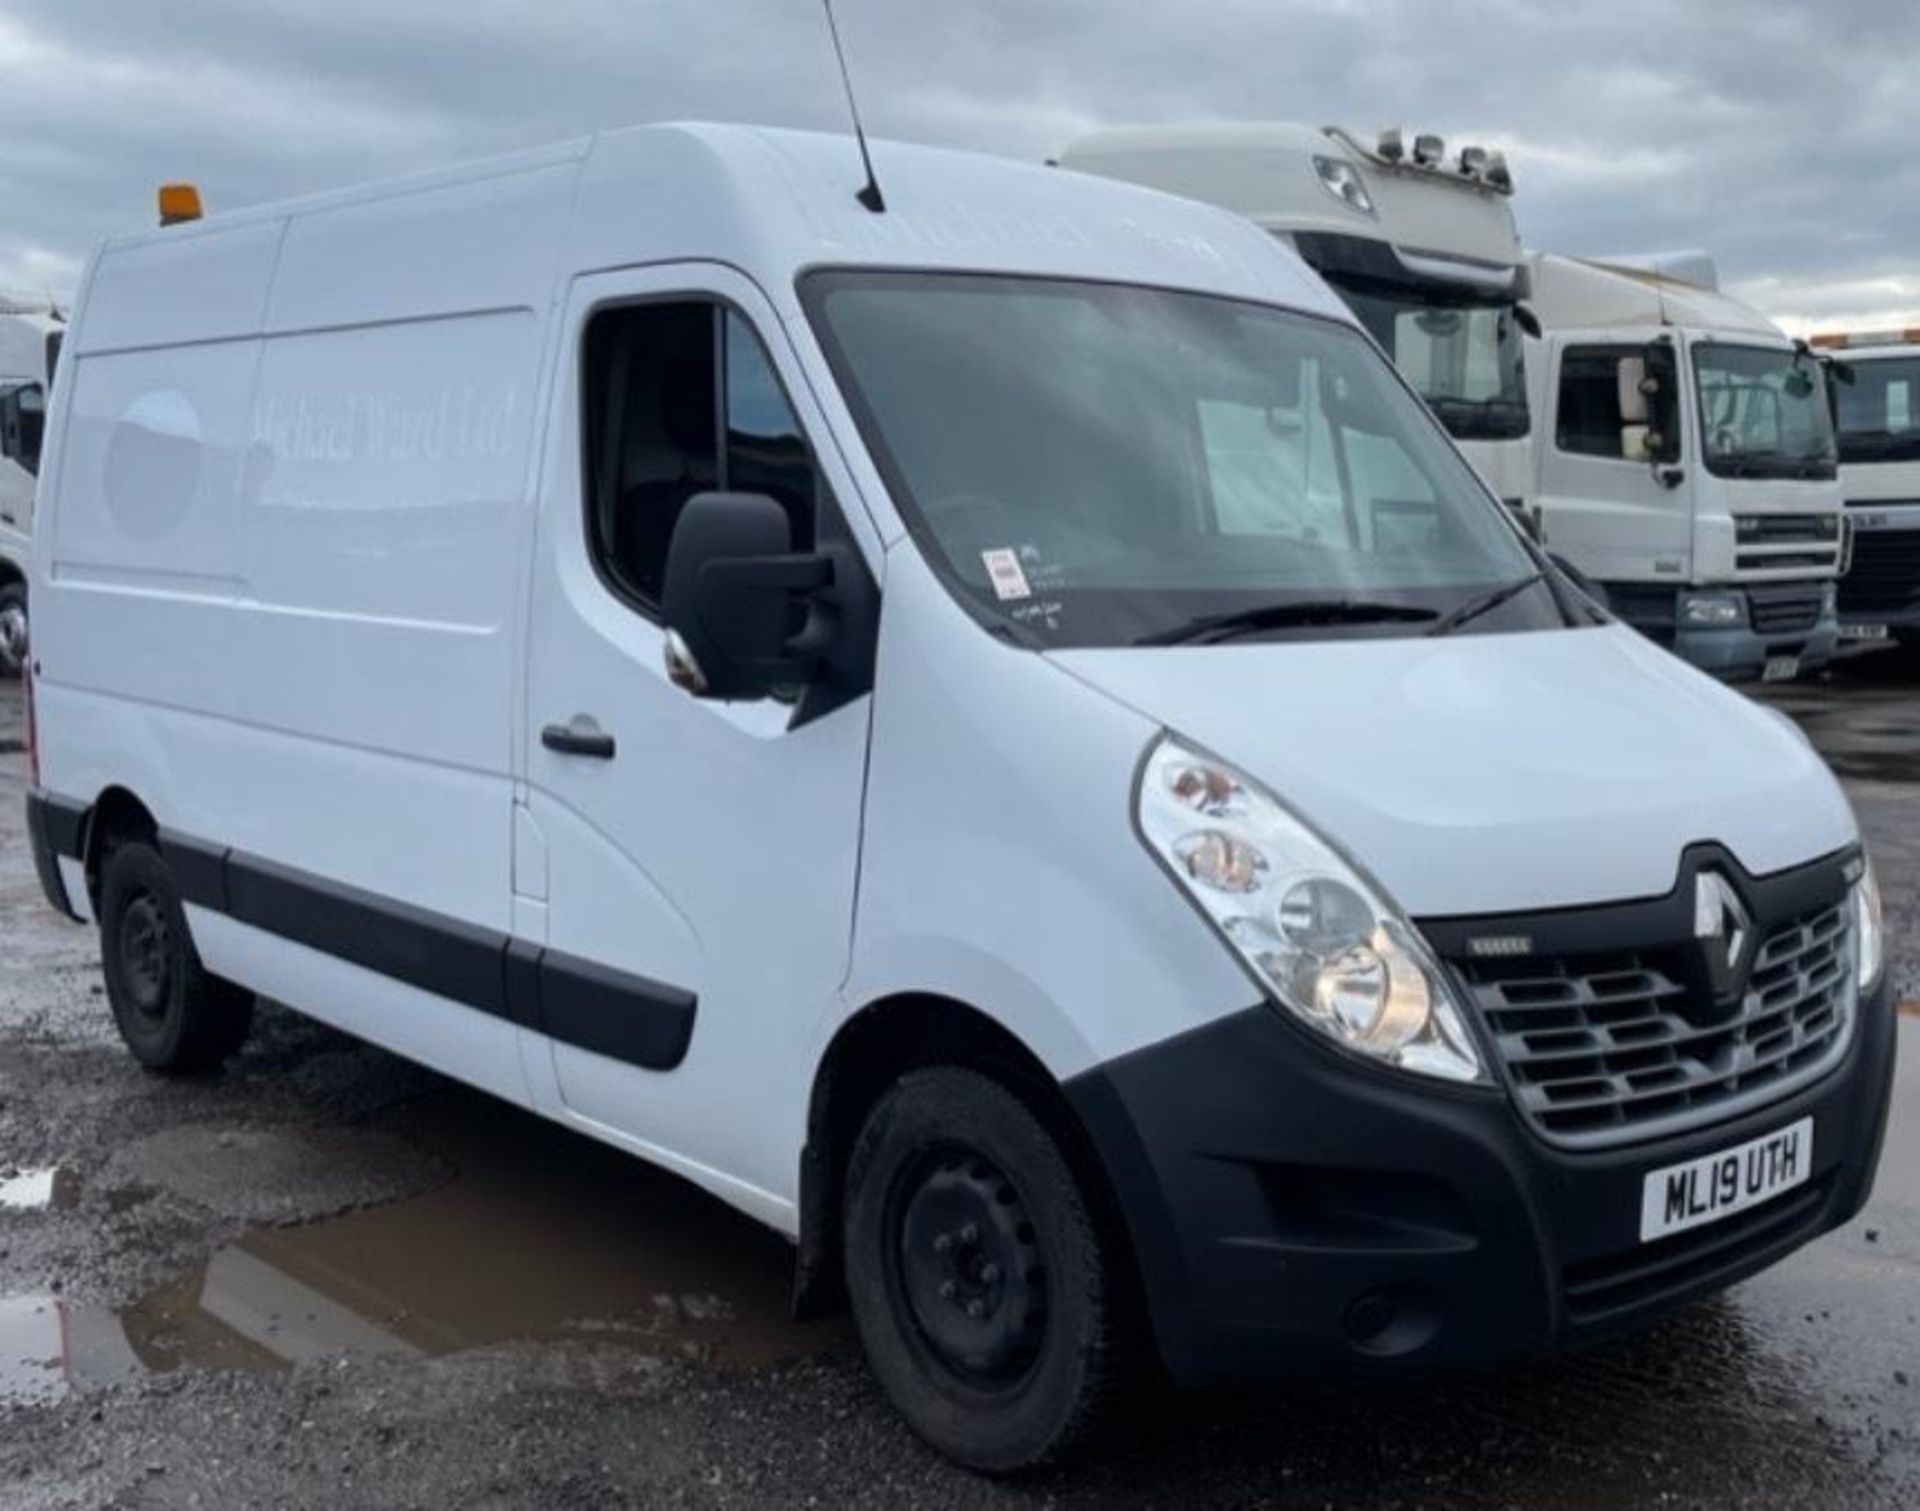 2019 RENAULT MASTER- 207K MILES- HPI CLEAR - READY TO GO! - Image 2 of 11